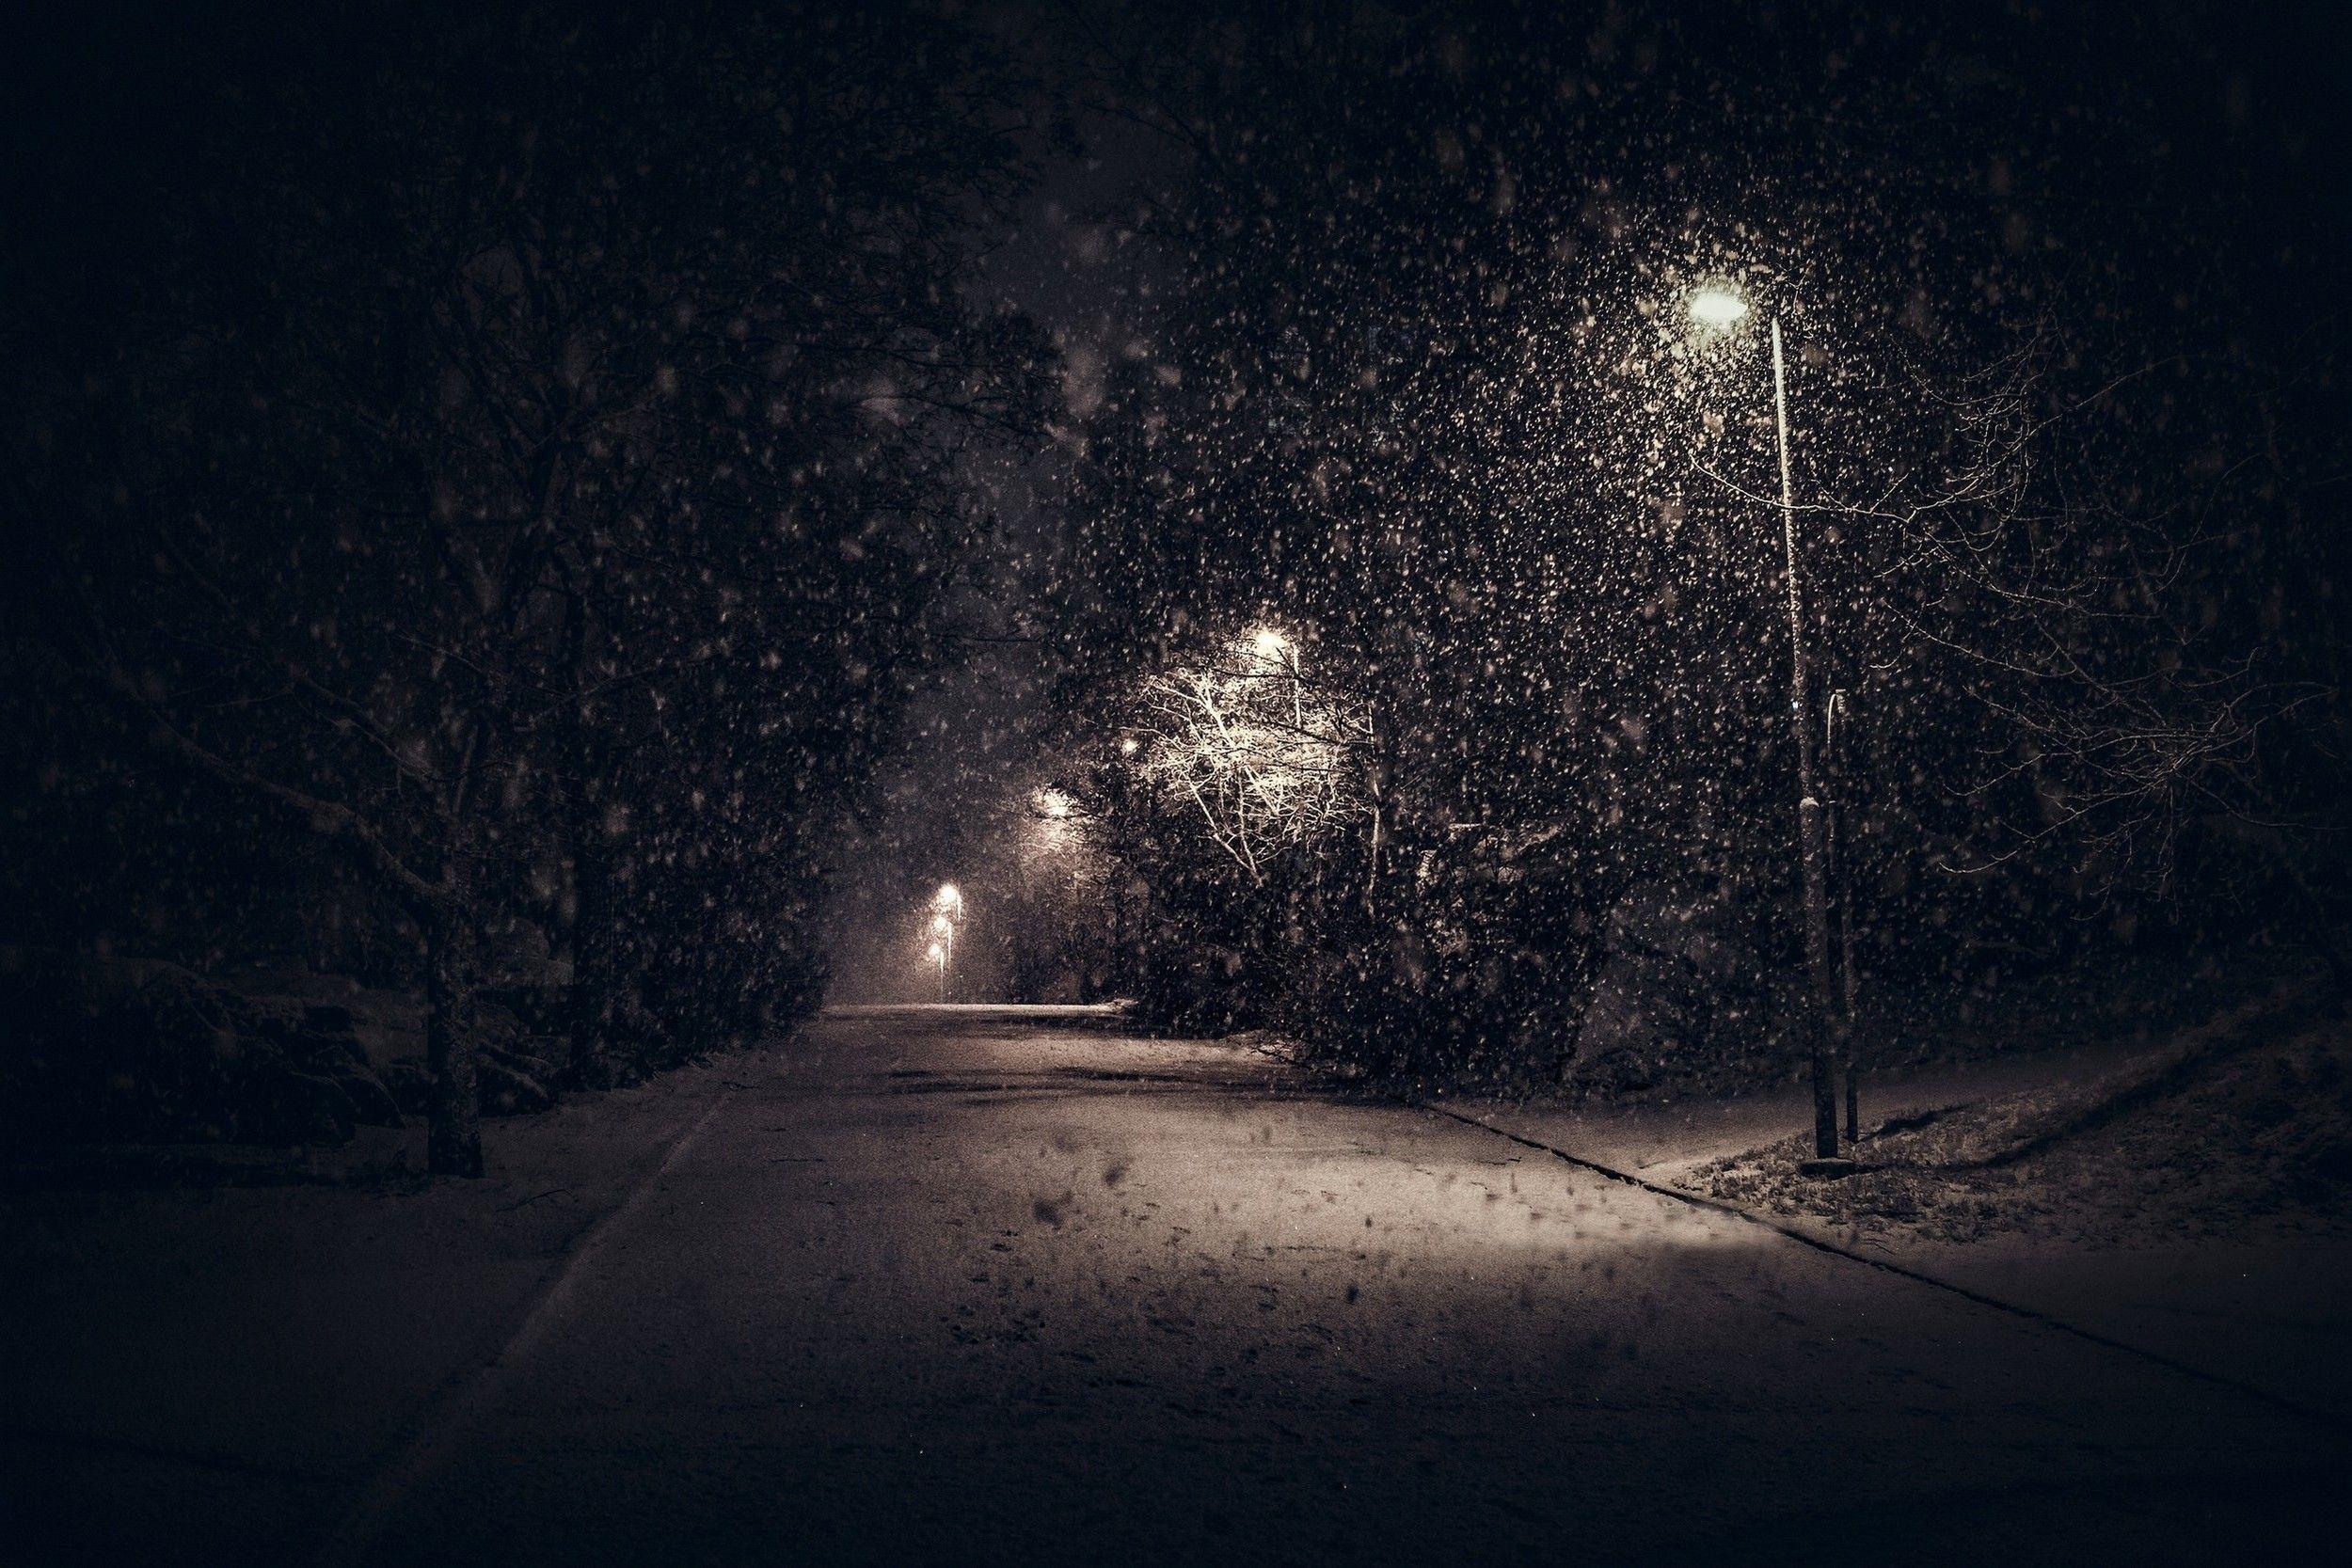 Snow Night Hd Wallpapers - Top Free Snow Night Hd Backgrounds